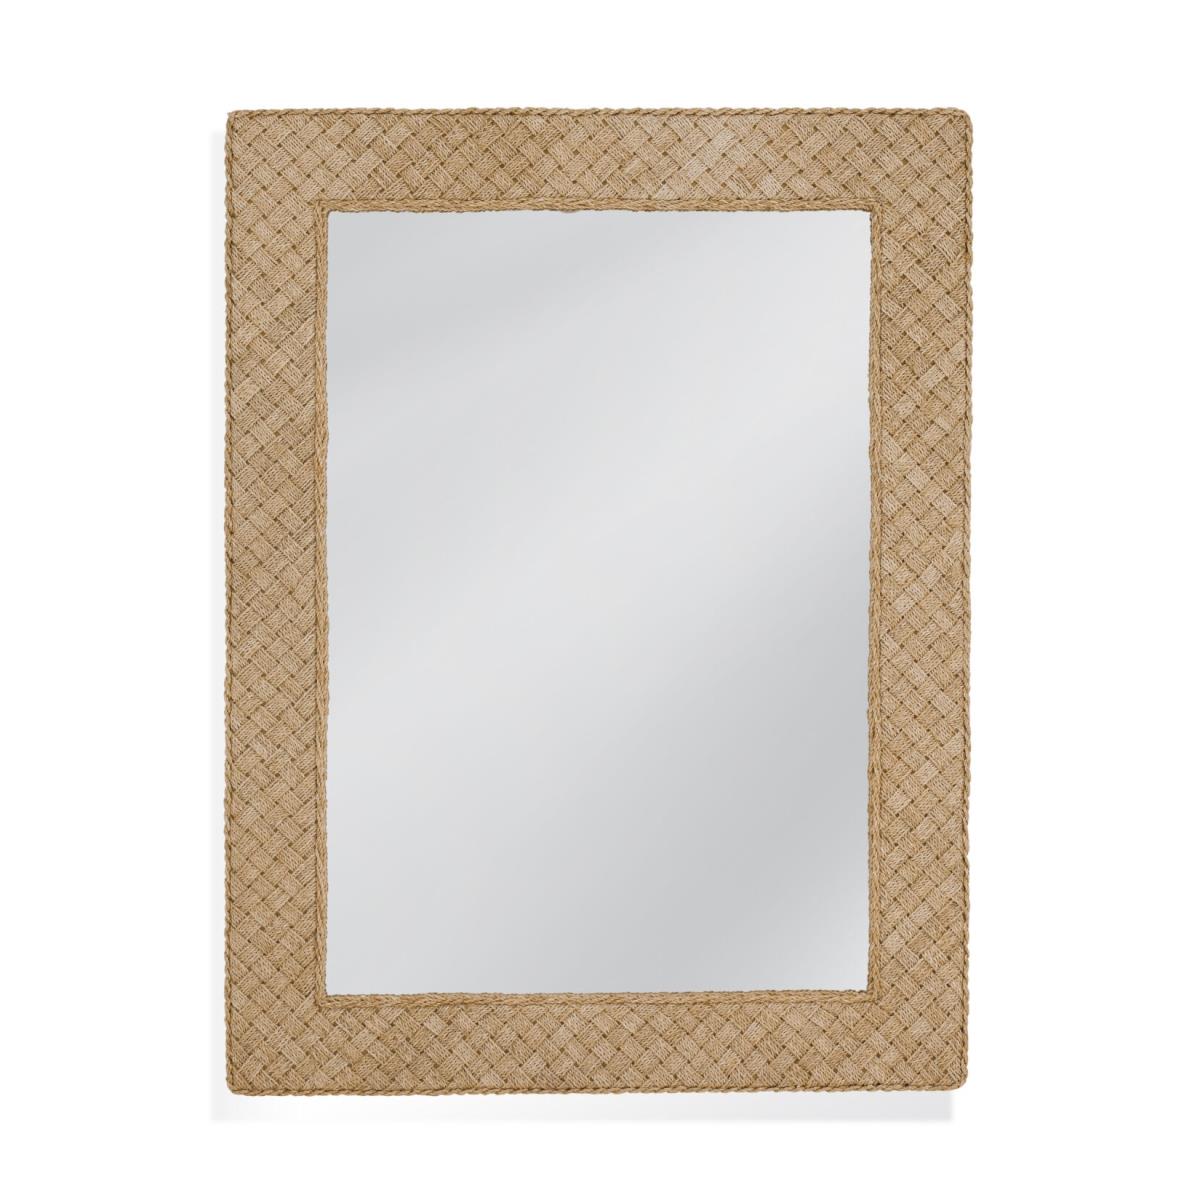 Picture of Bassett Mirror M4729EC 36 x 43 in. Weston Rectangle Wall Mirror, Natural